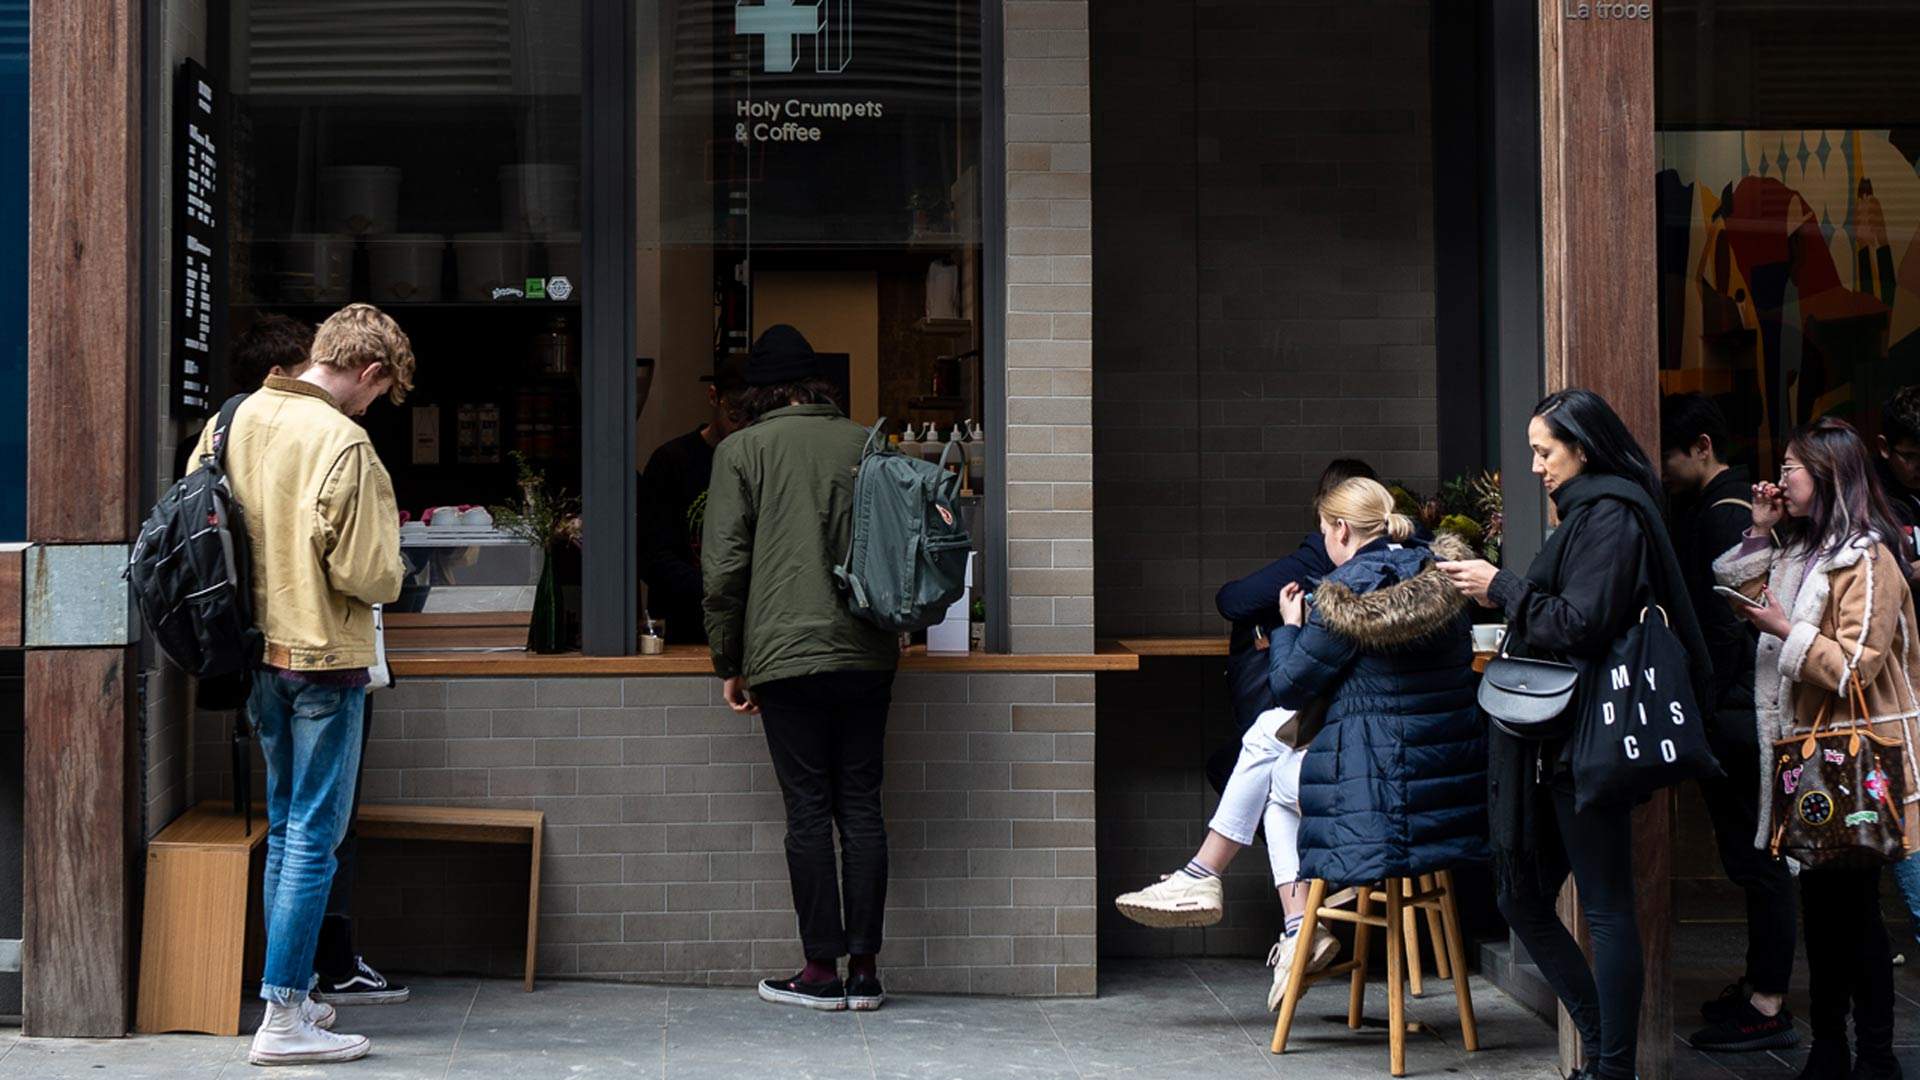 Holy Crumpets Is Melbourne CBD's Cafe Devoted Entirely to the Golden Breakfast Snack